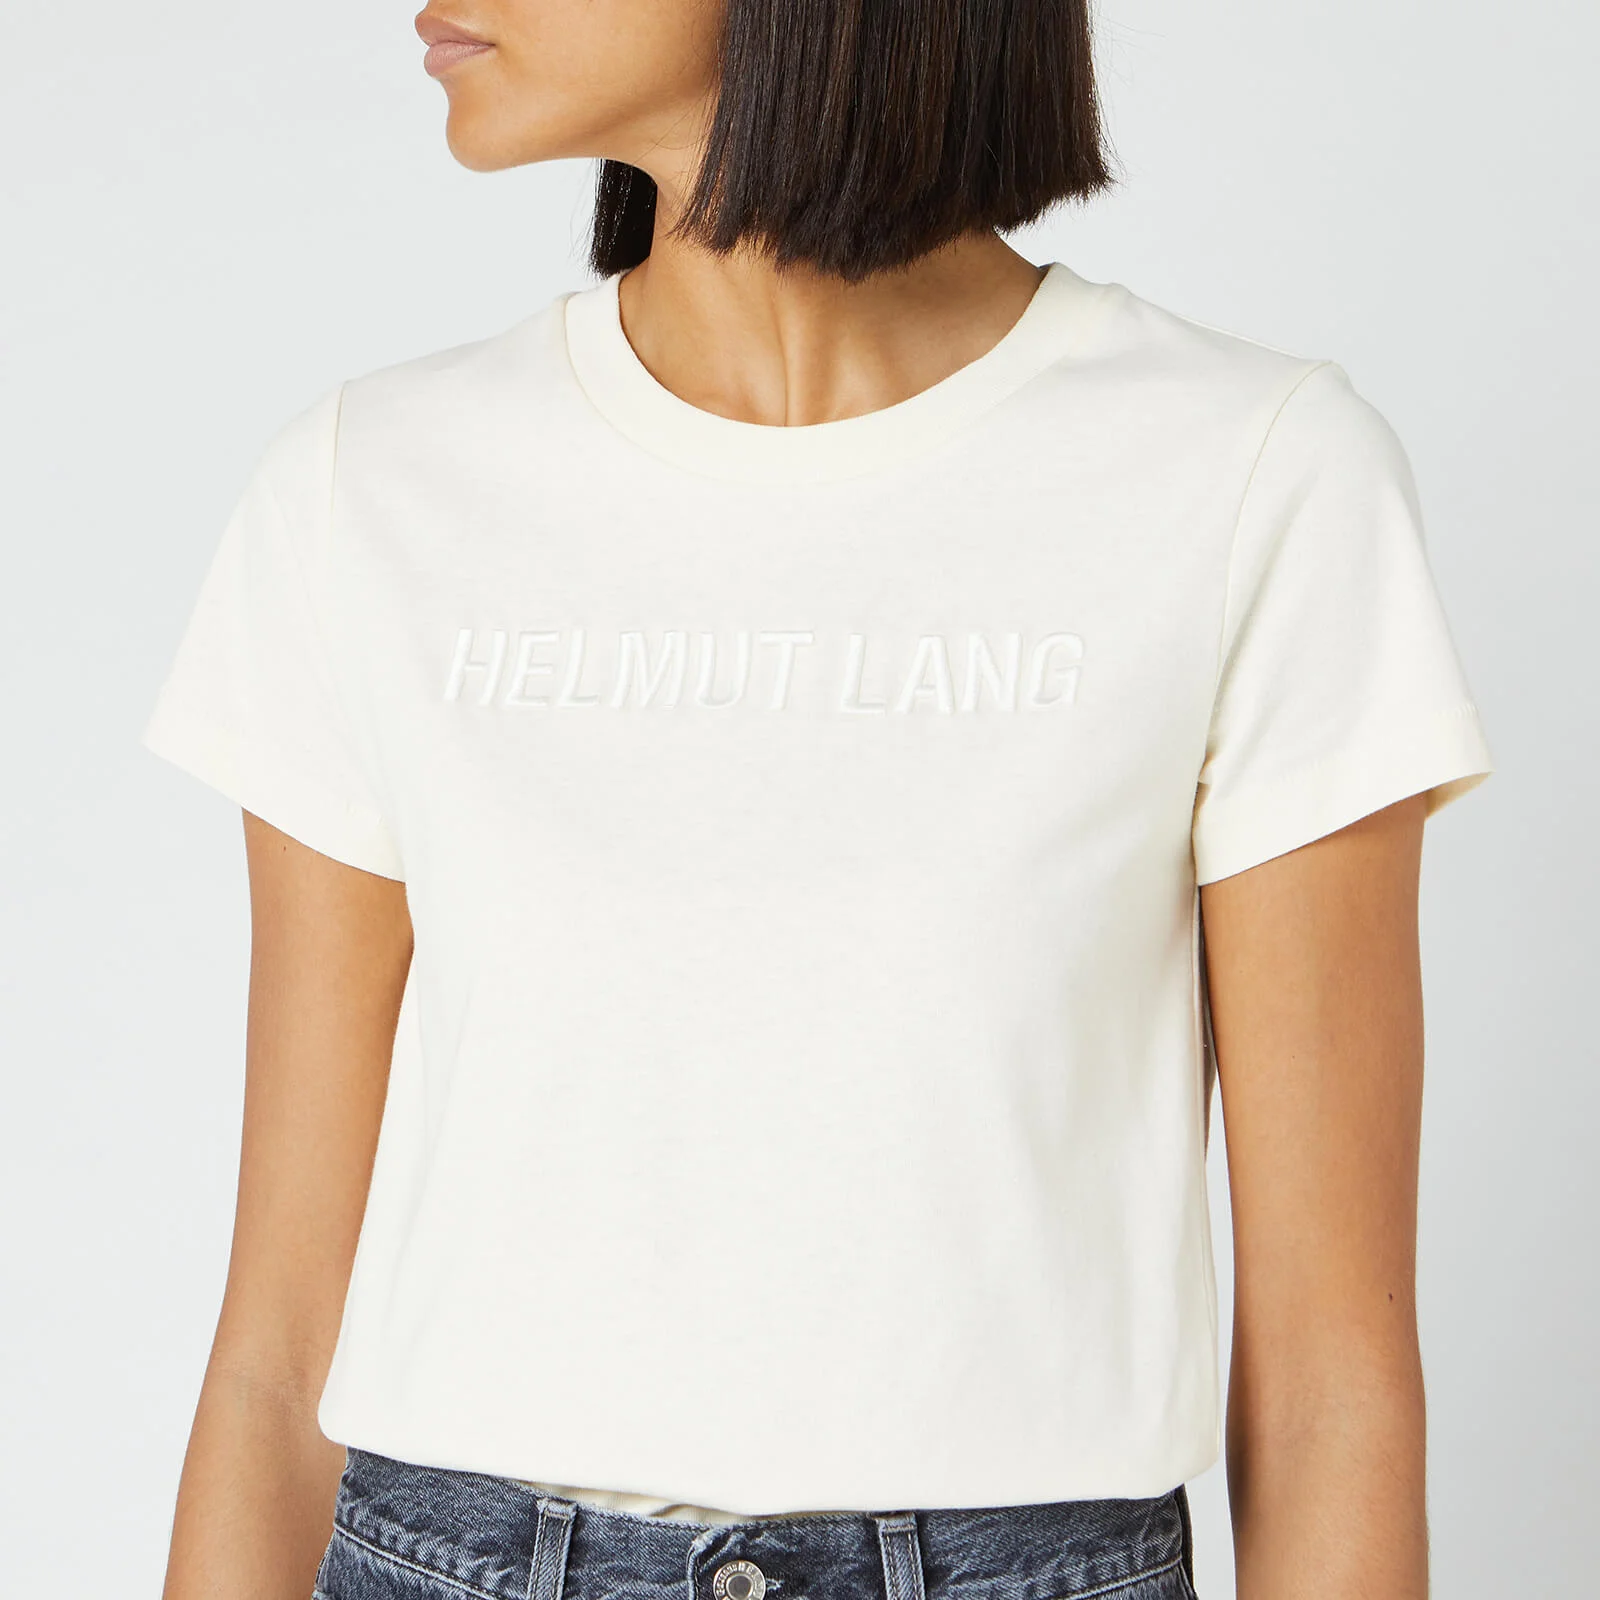 Helmut Lang Women's Raised Embroidered Standard T-Shirt - Pearl Image 1